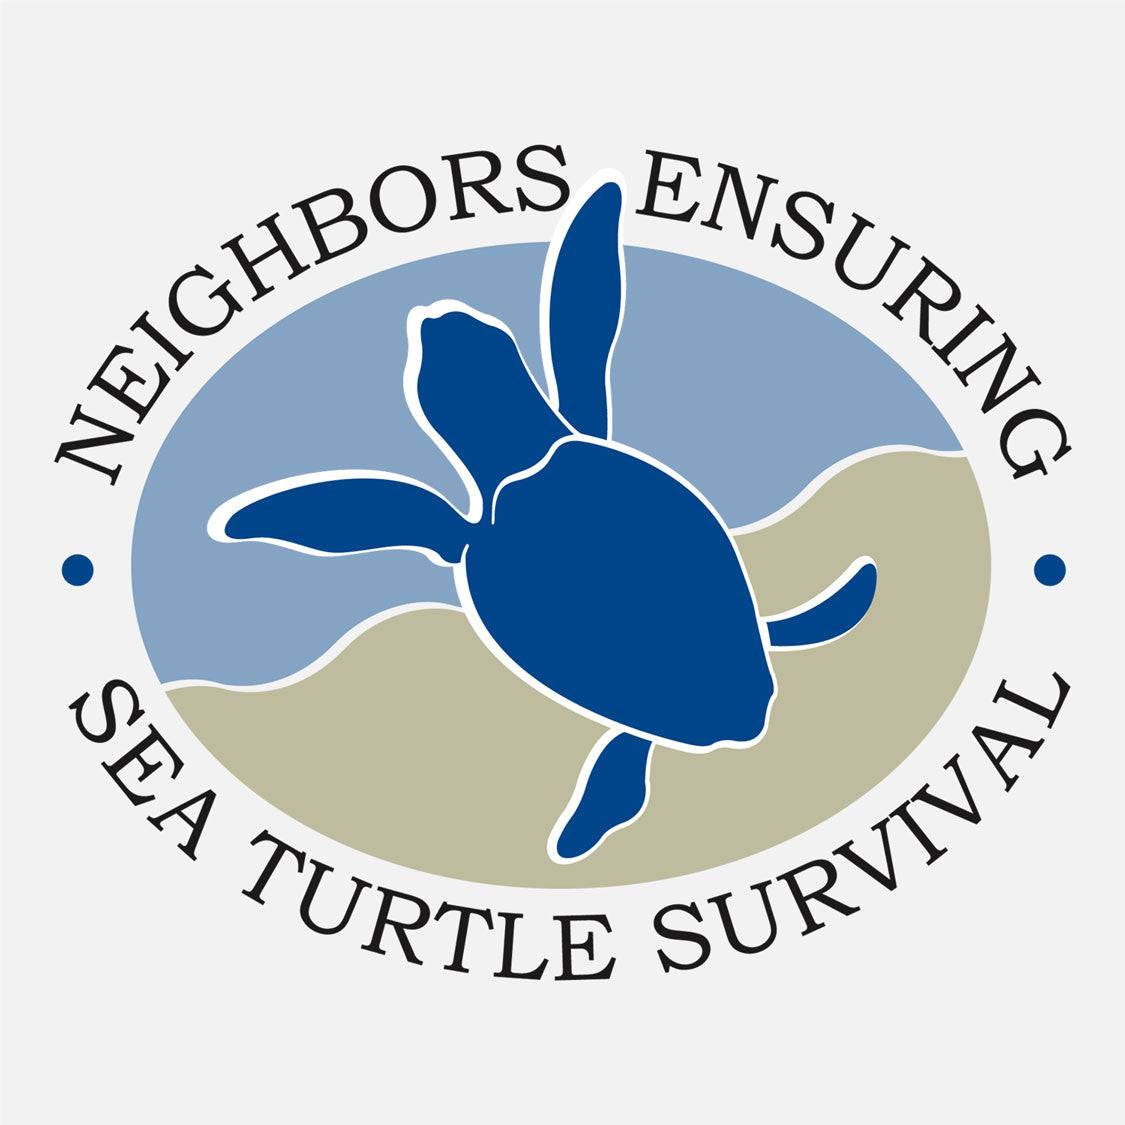 NESTS - Neighbors Ensuring Sea Turtle is a free, community-based educational outreach program that encourages the public and businesses to engage in simple activities that benefit nesting sea turtles, their nests, and their hatchlings. The logo is a graphic of a hatchling sea turtle entering the water. 